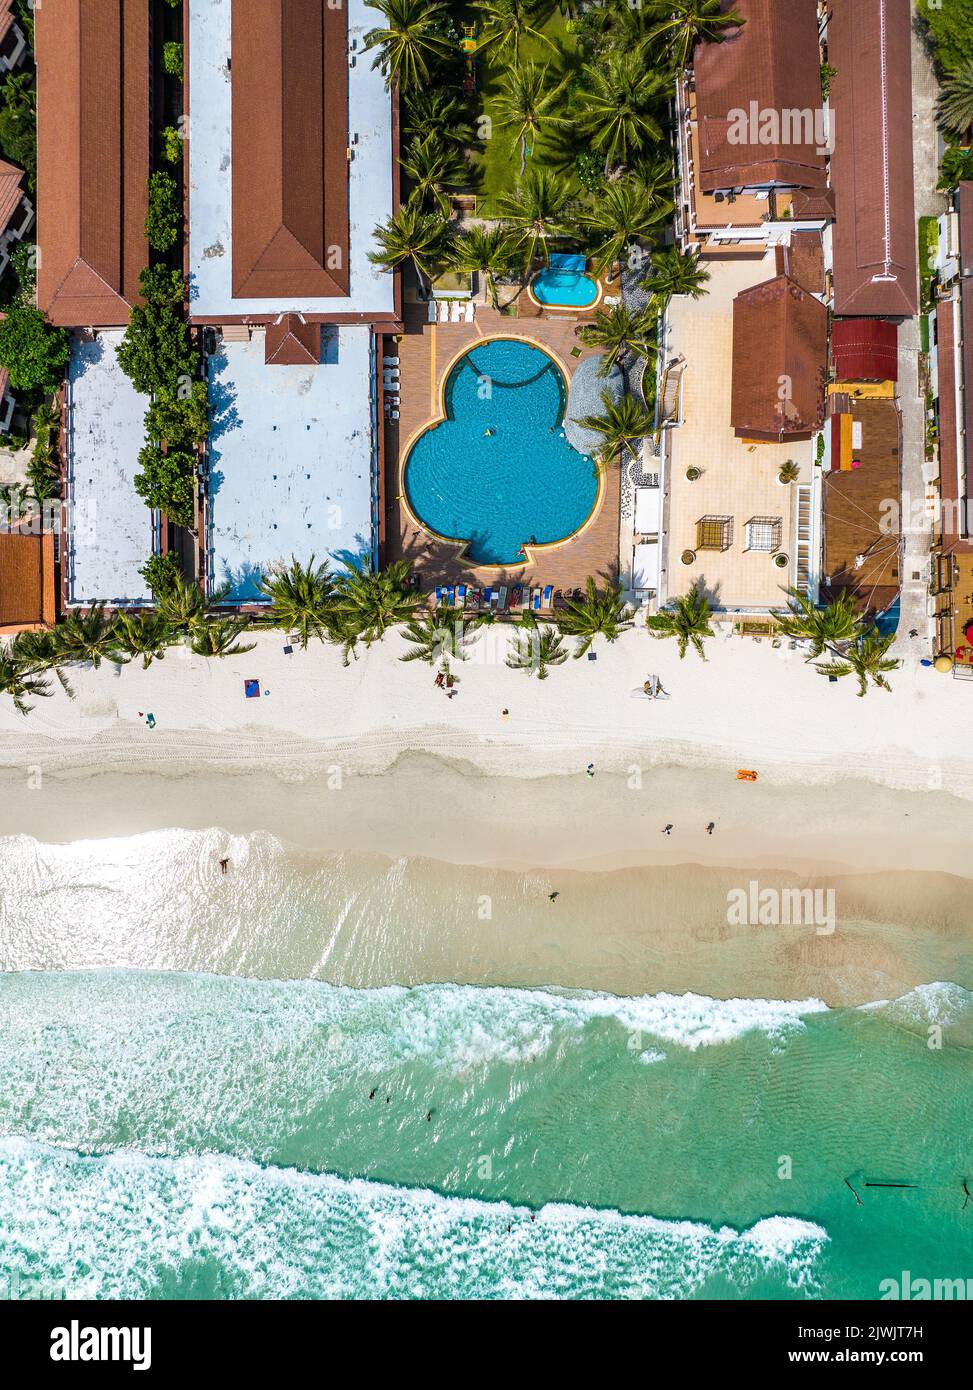 Aerial view of Haad Rin beach or Hat Rin in Ko Pha Ngan, Thailand Stock Photo